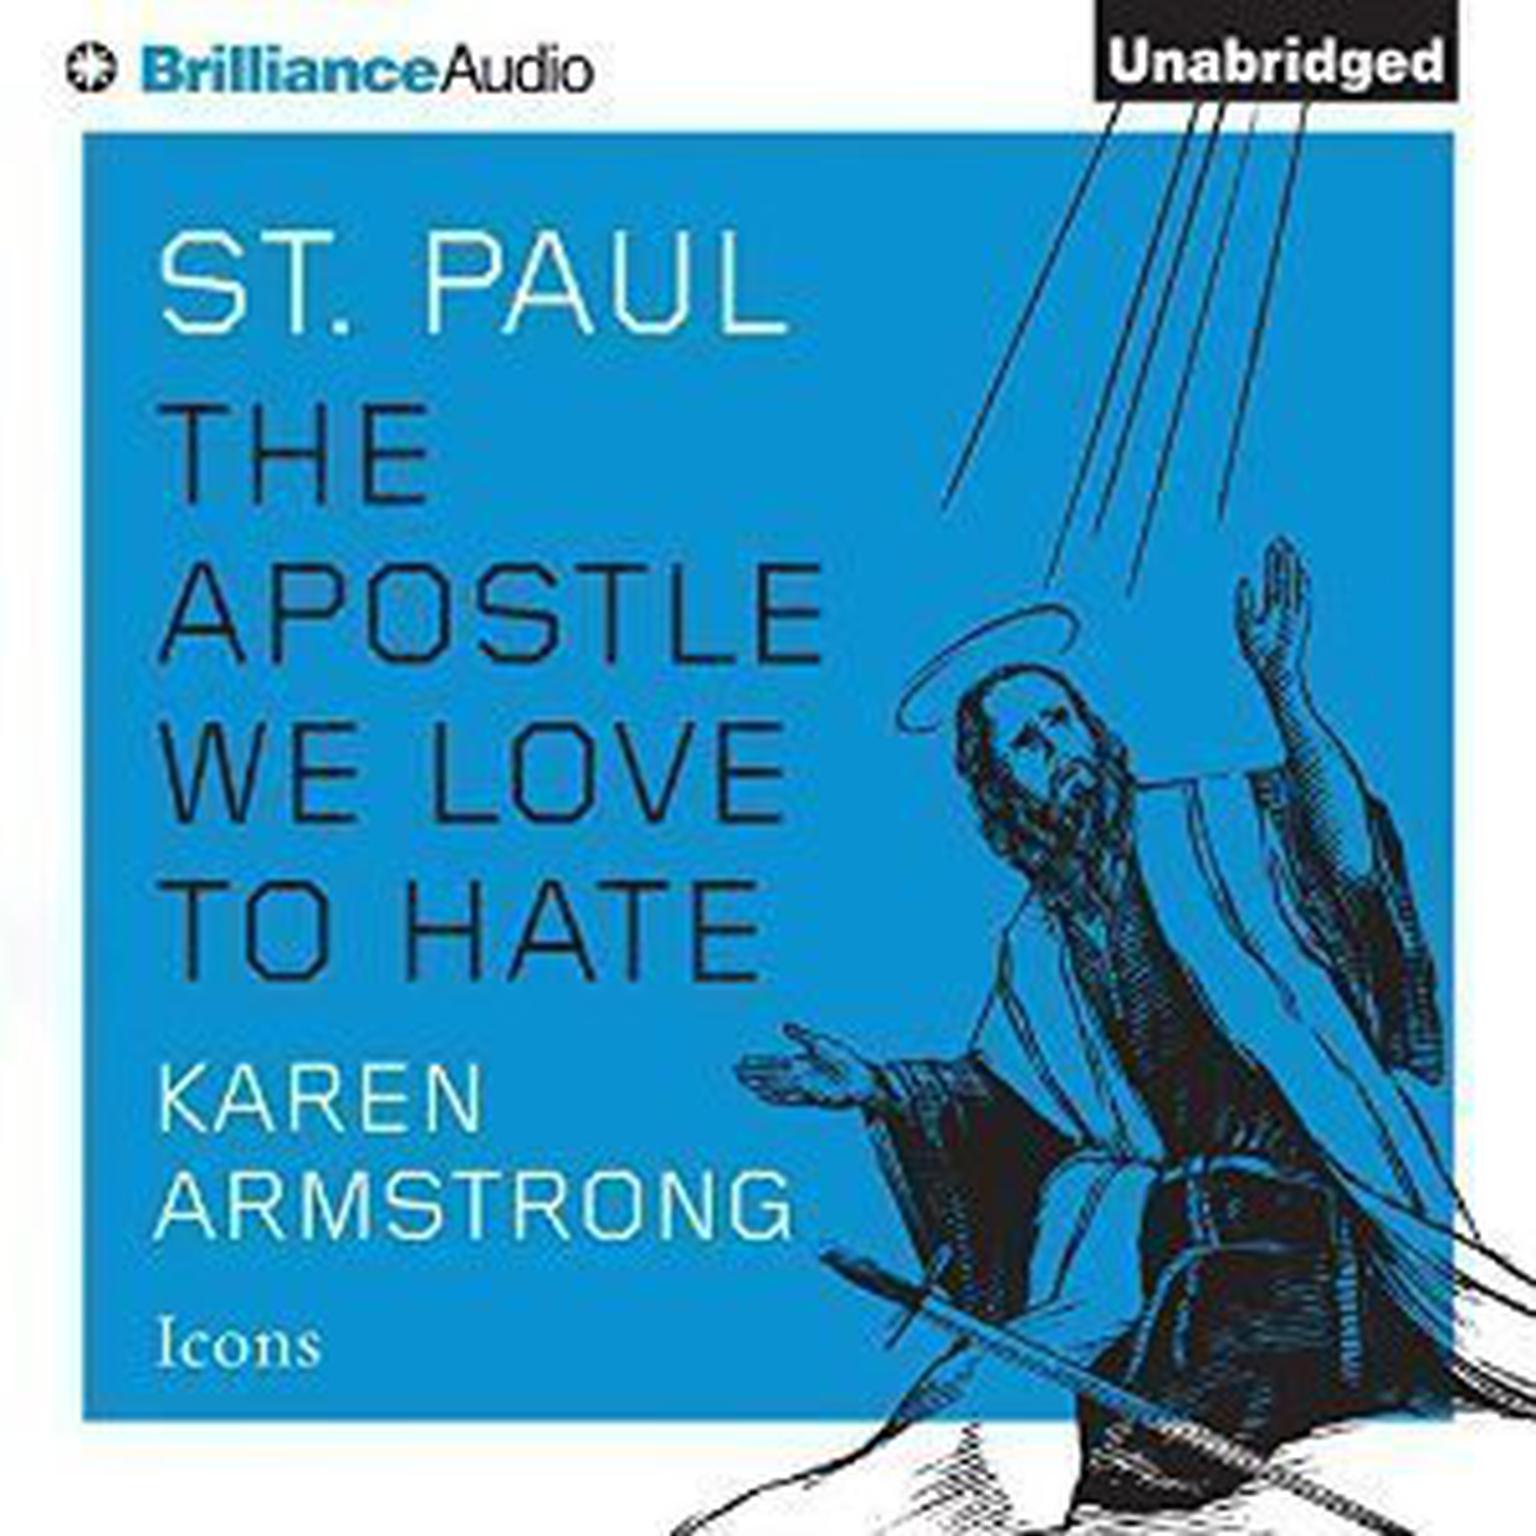 St. Paul: The Apostle We Love to Hate Audiobook, by Karen Armstrong